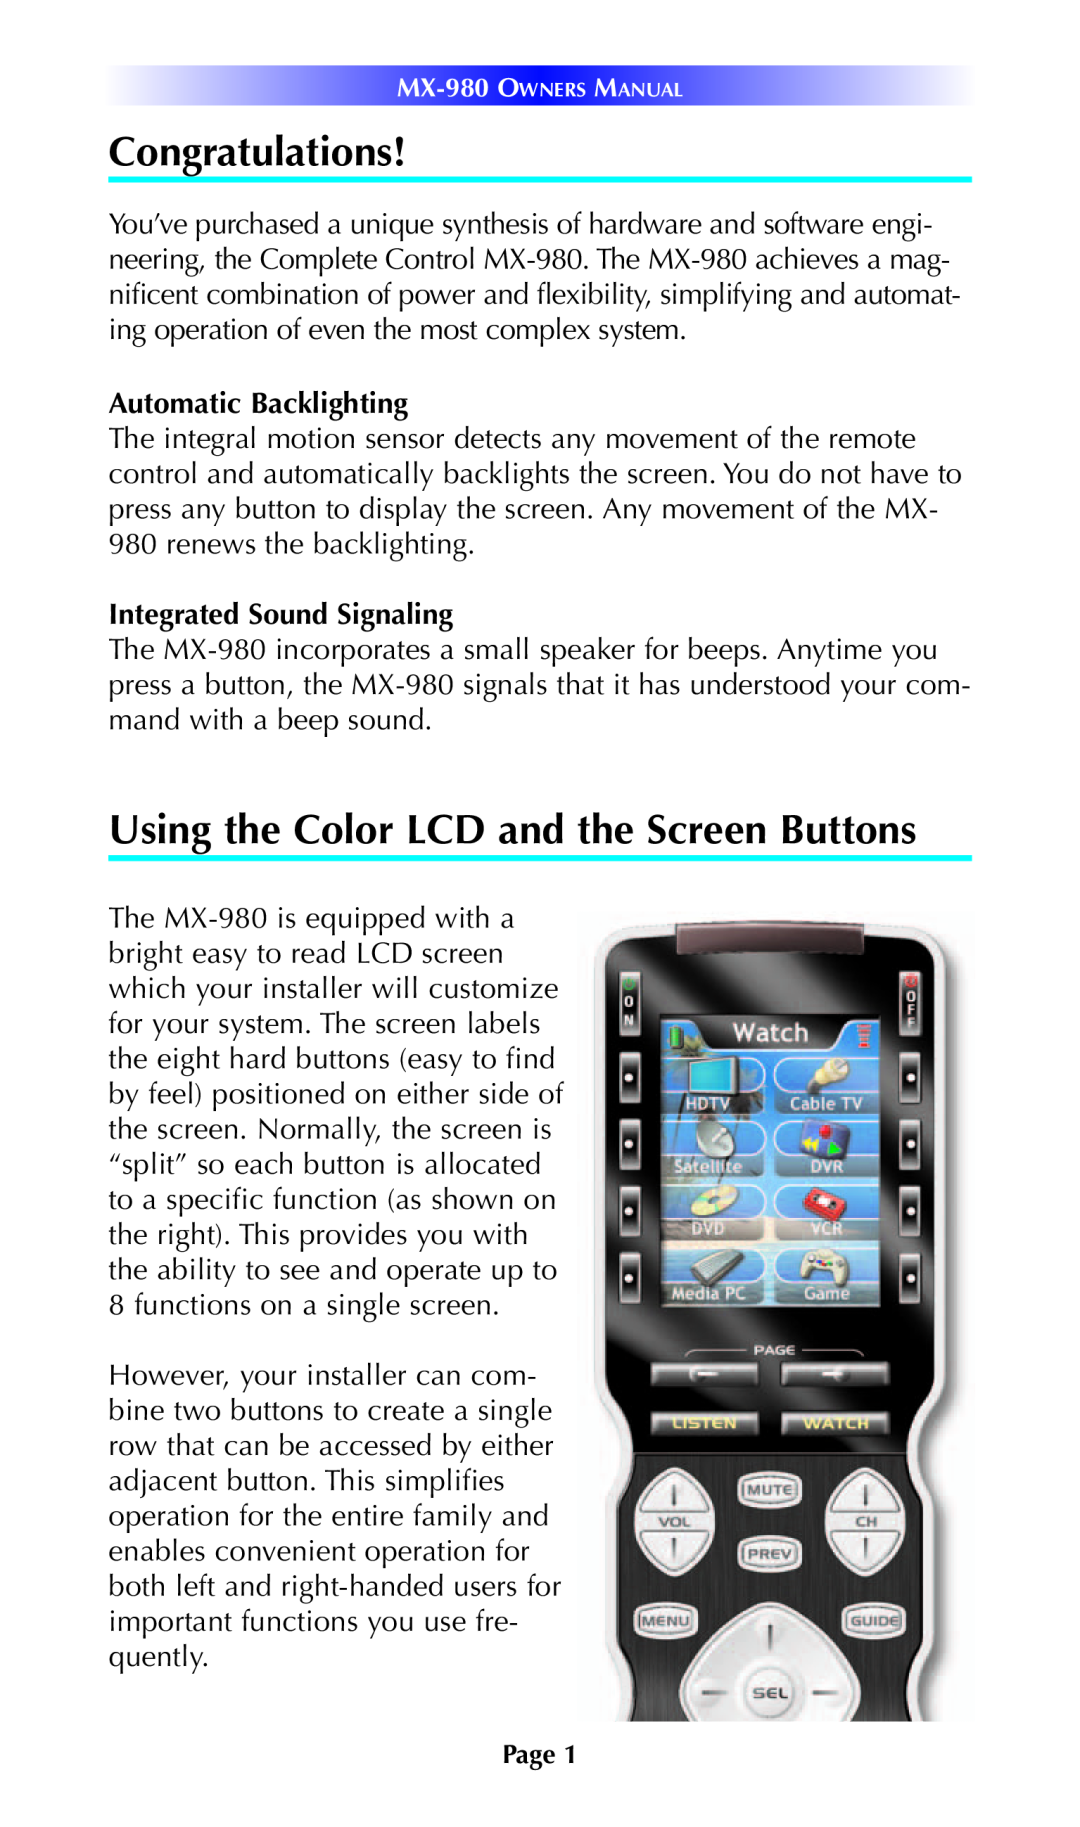 Universal Remote Control MX-980 manual Congratulations, Using the Color LCD and the Screen Buttons, Automatic Backlighting 